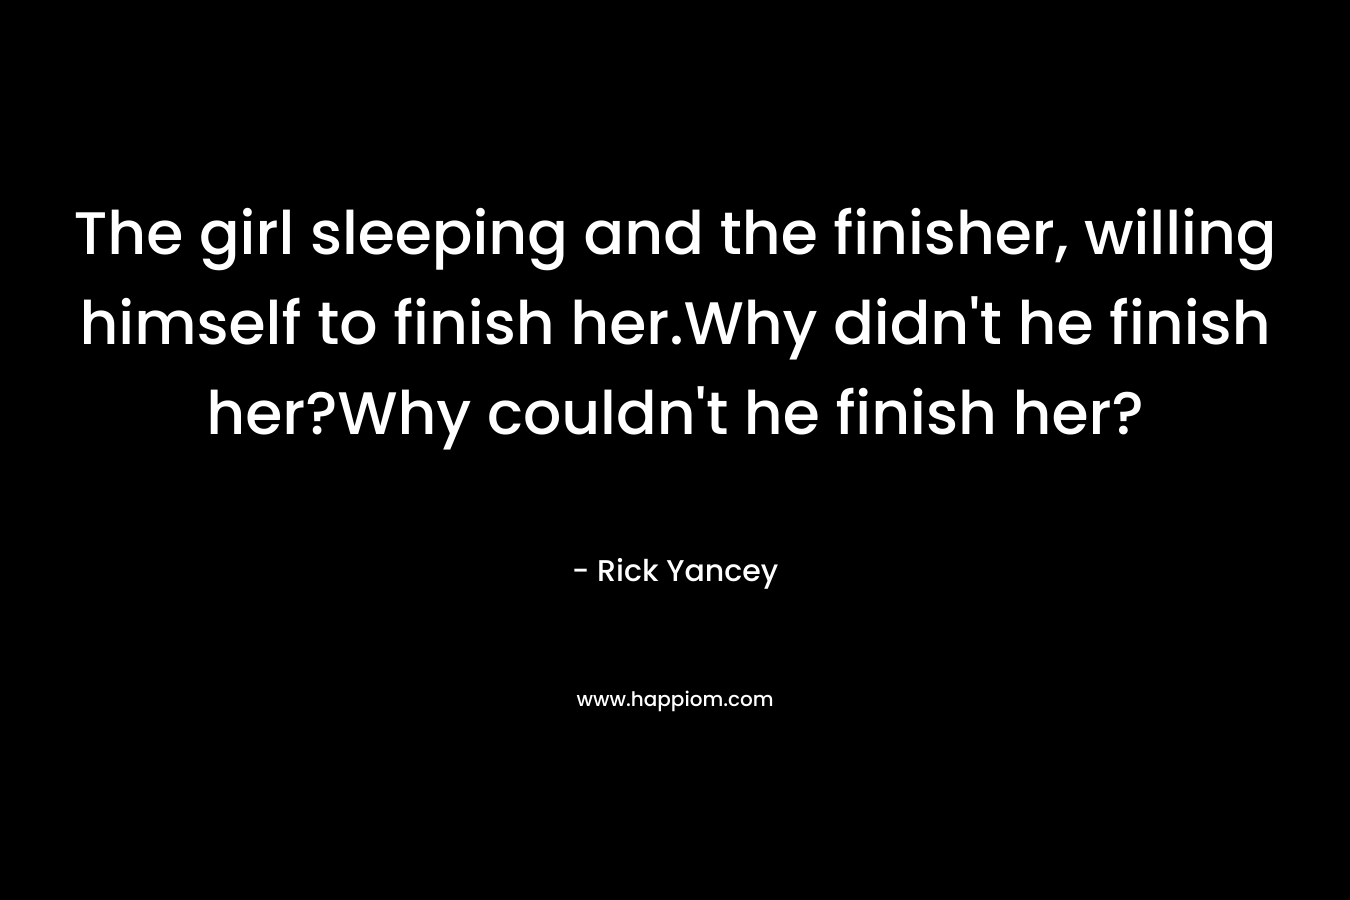 The girl sleeping and the finisher, willing himself to finish her.Why didn't he finish her?Why couldn't he finish her?